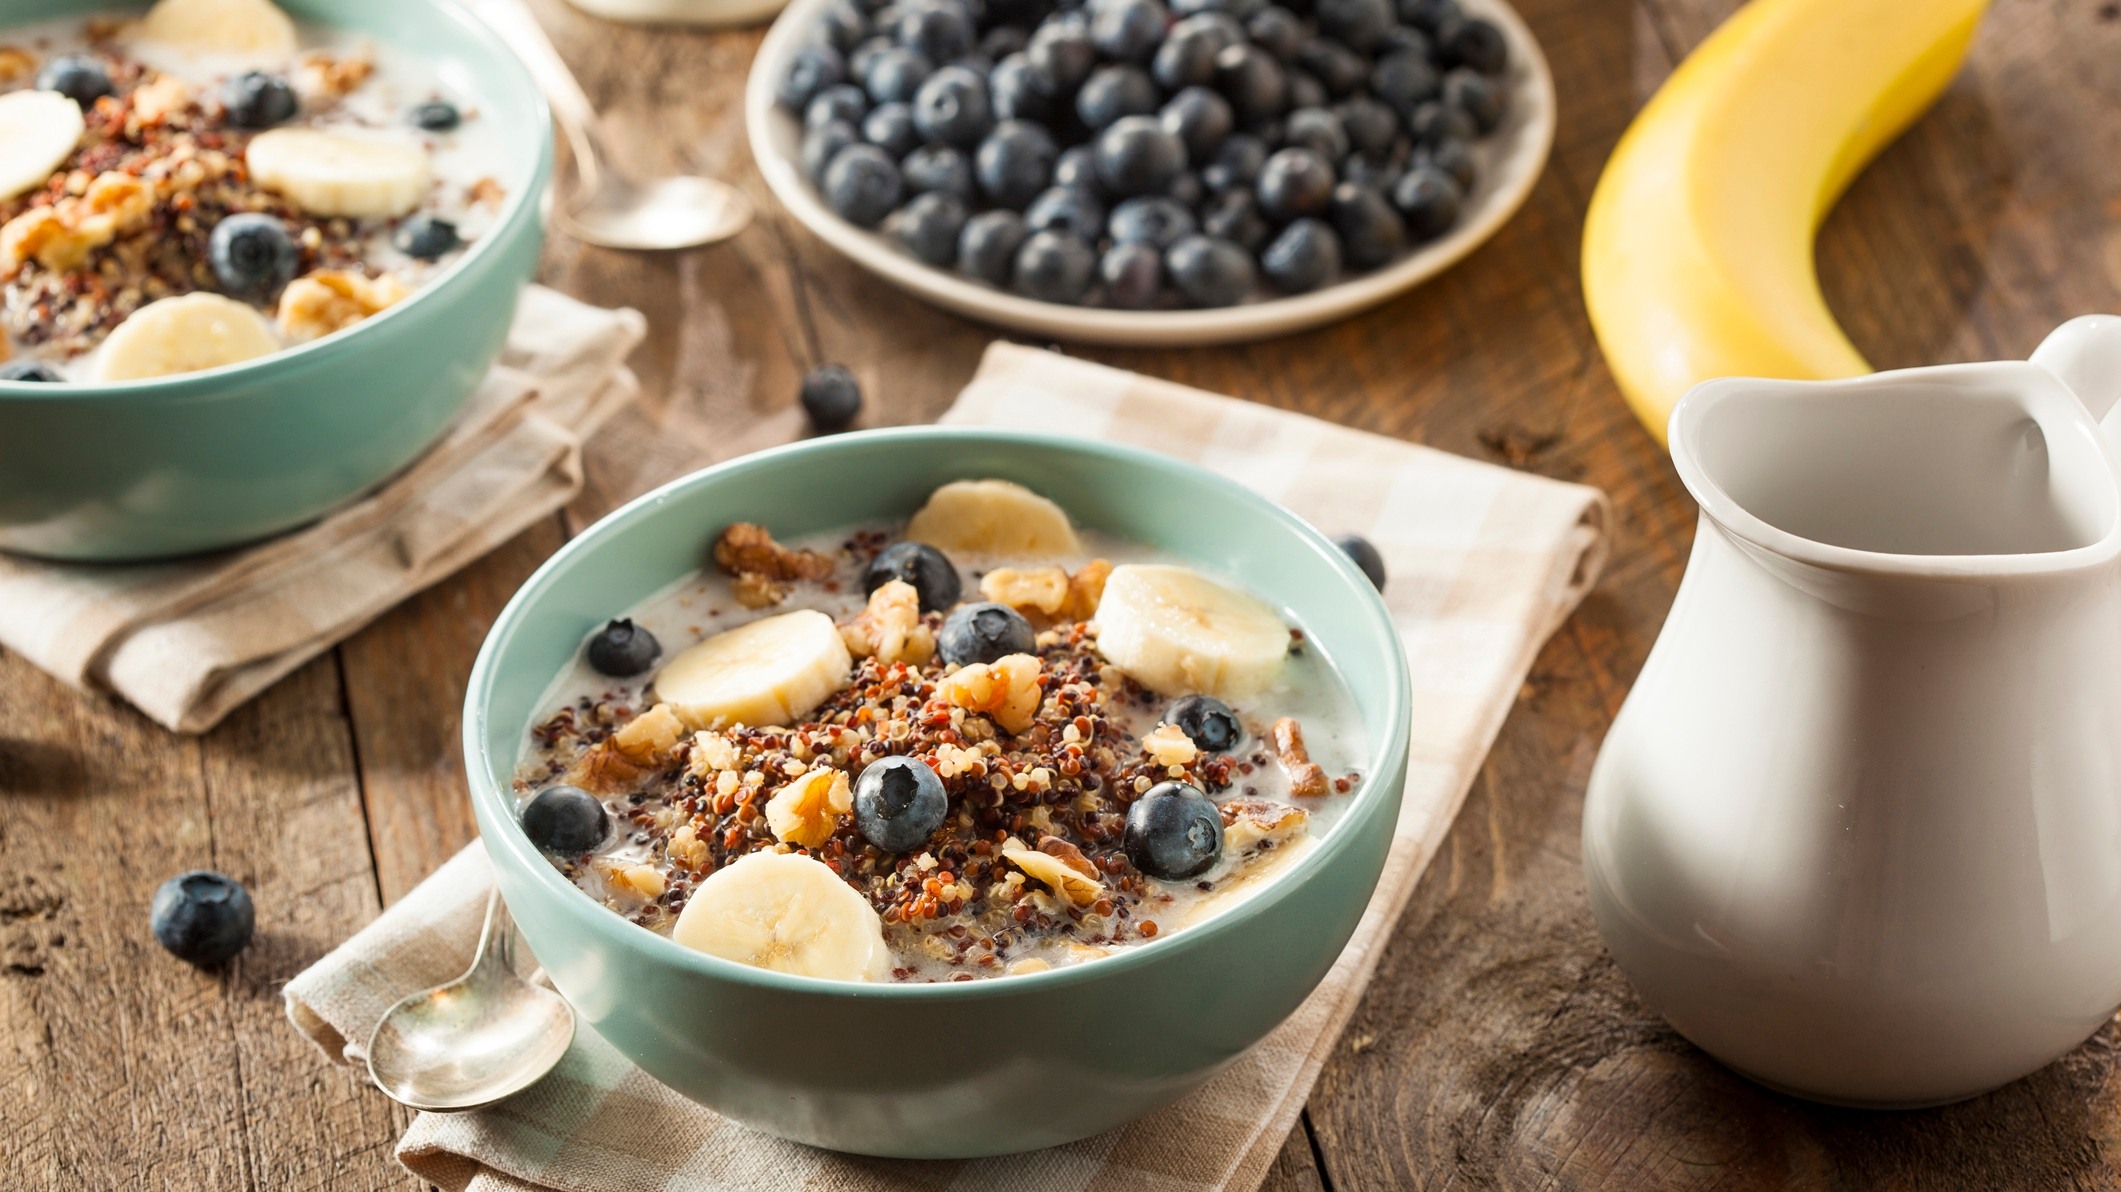 oatmeal cereal and fruit image